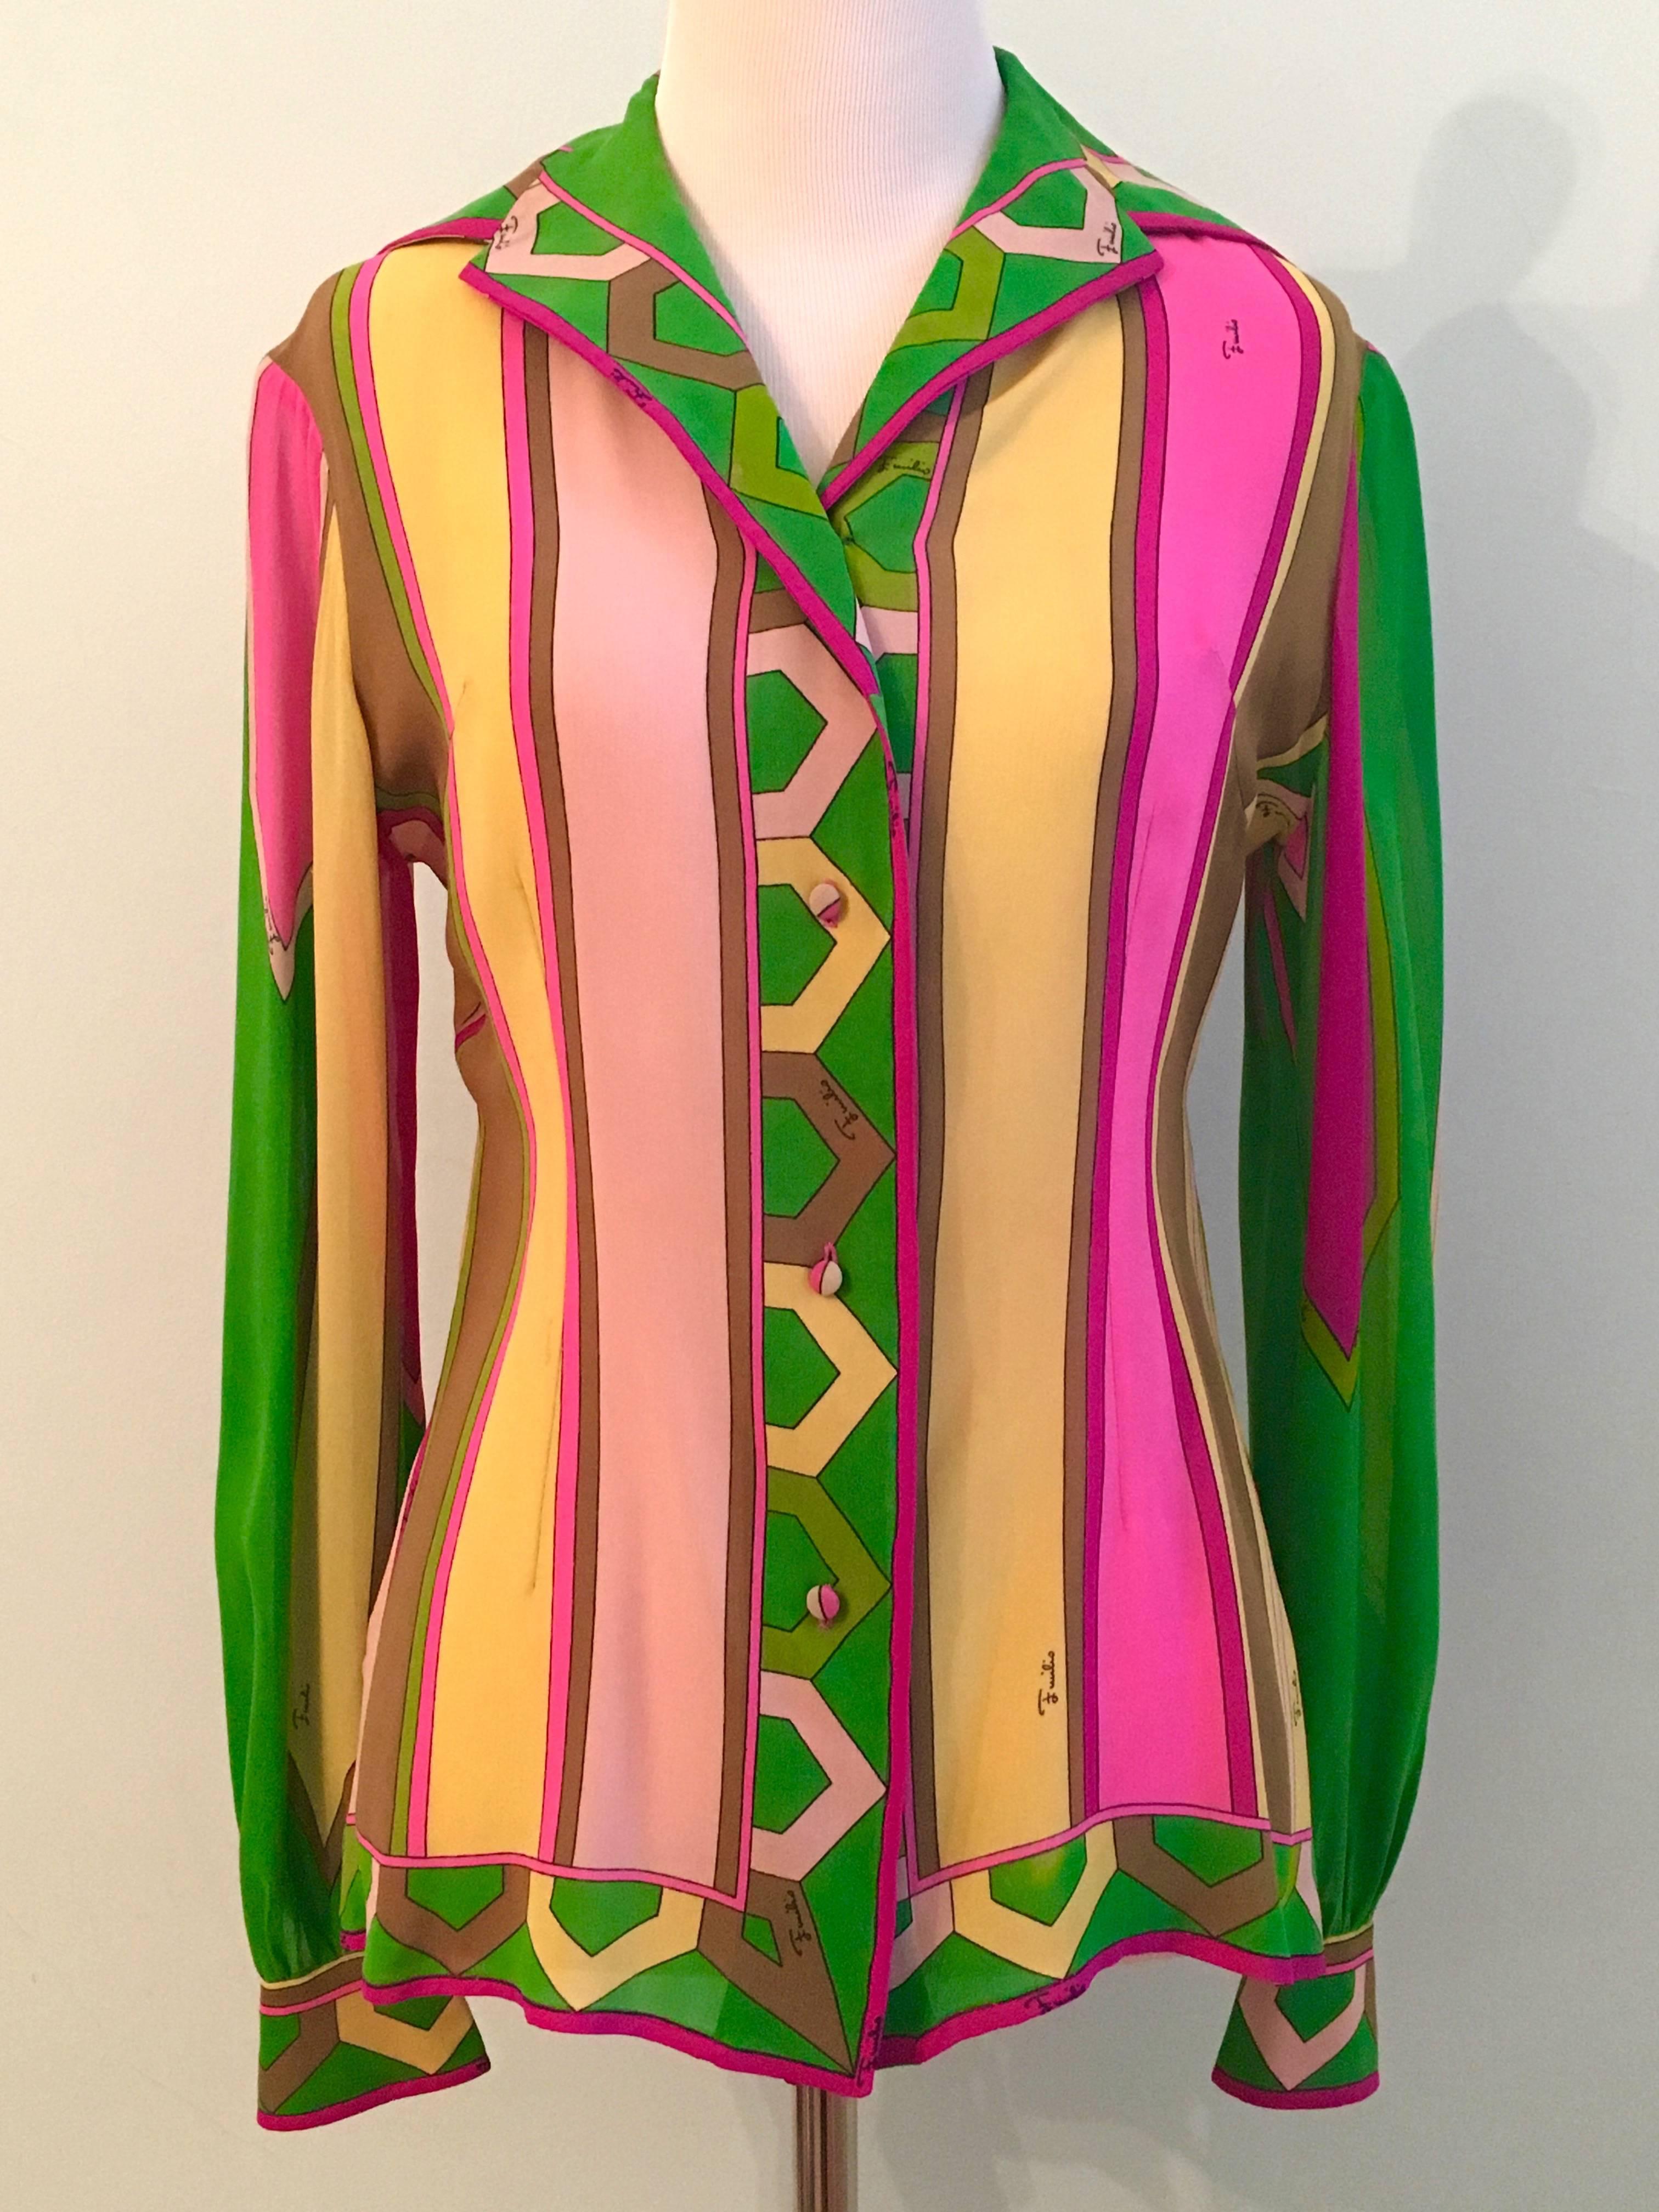 This is an amazing Emilio Pucci blouse from the 1960s. It is silk chiffon and printed with a brightly colored abstract stripe design. It is signed 'Emilio Pucci' throughout the print. It is in very good vintage condition with the exception of a few